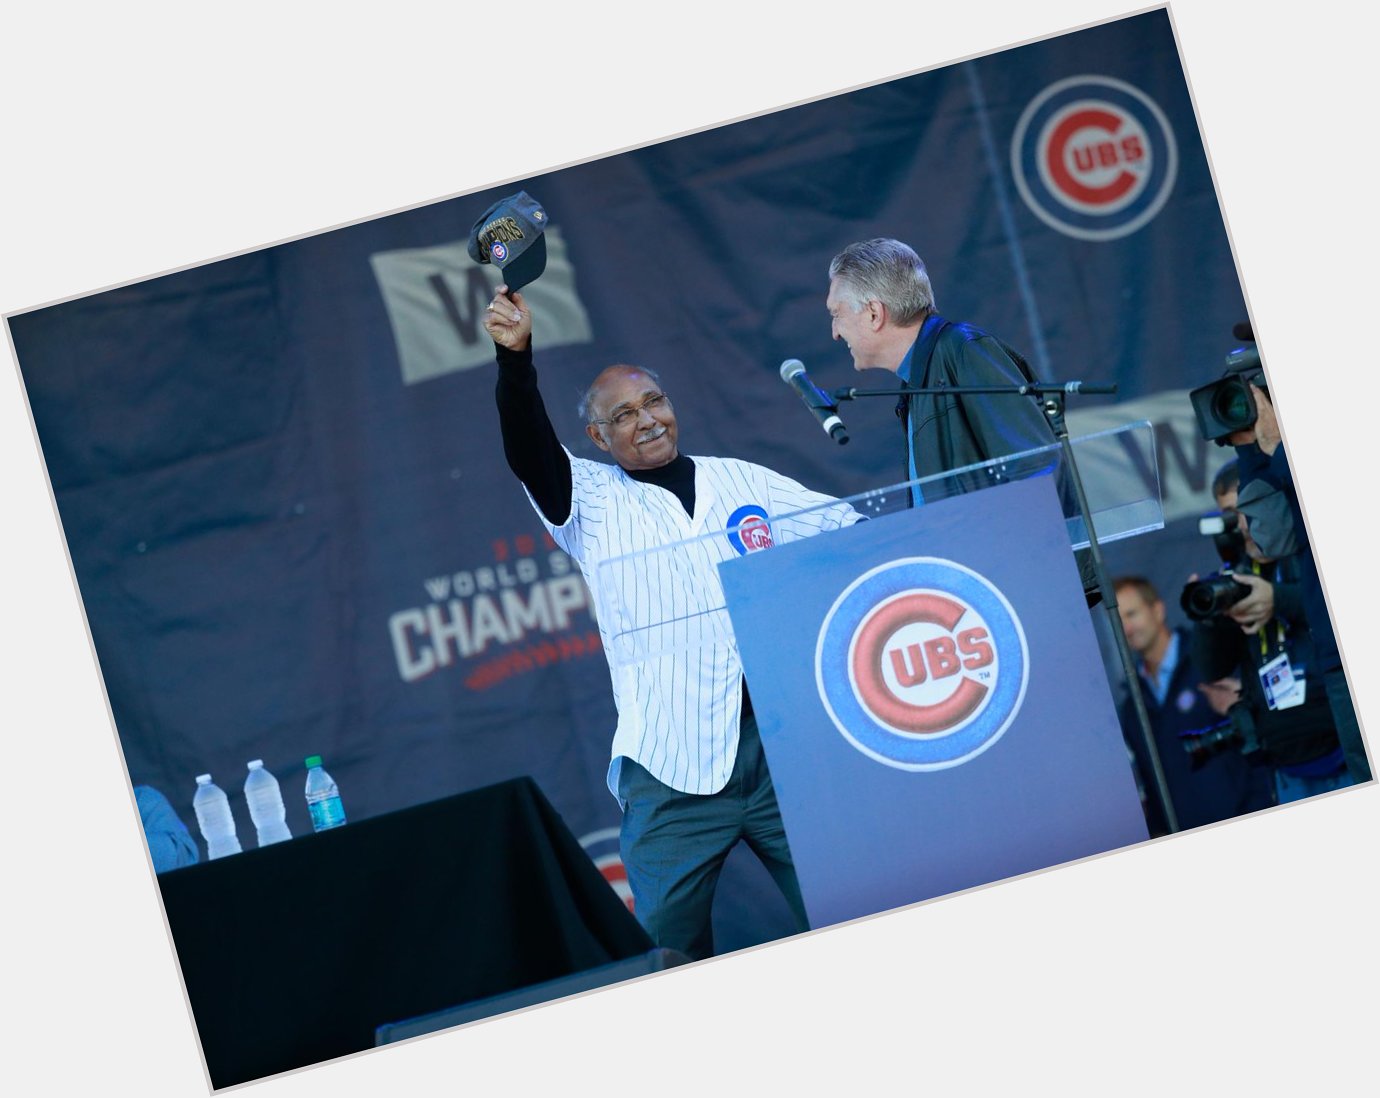 Cubs:

Join us in wishing a happy birthday to Sweet Swingin\ Billy Williams! 